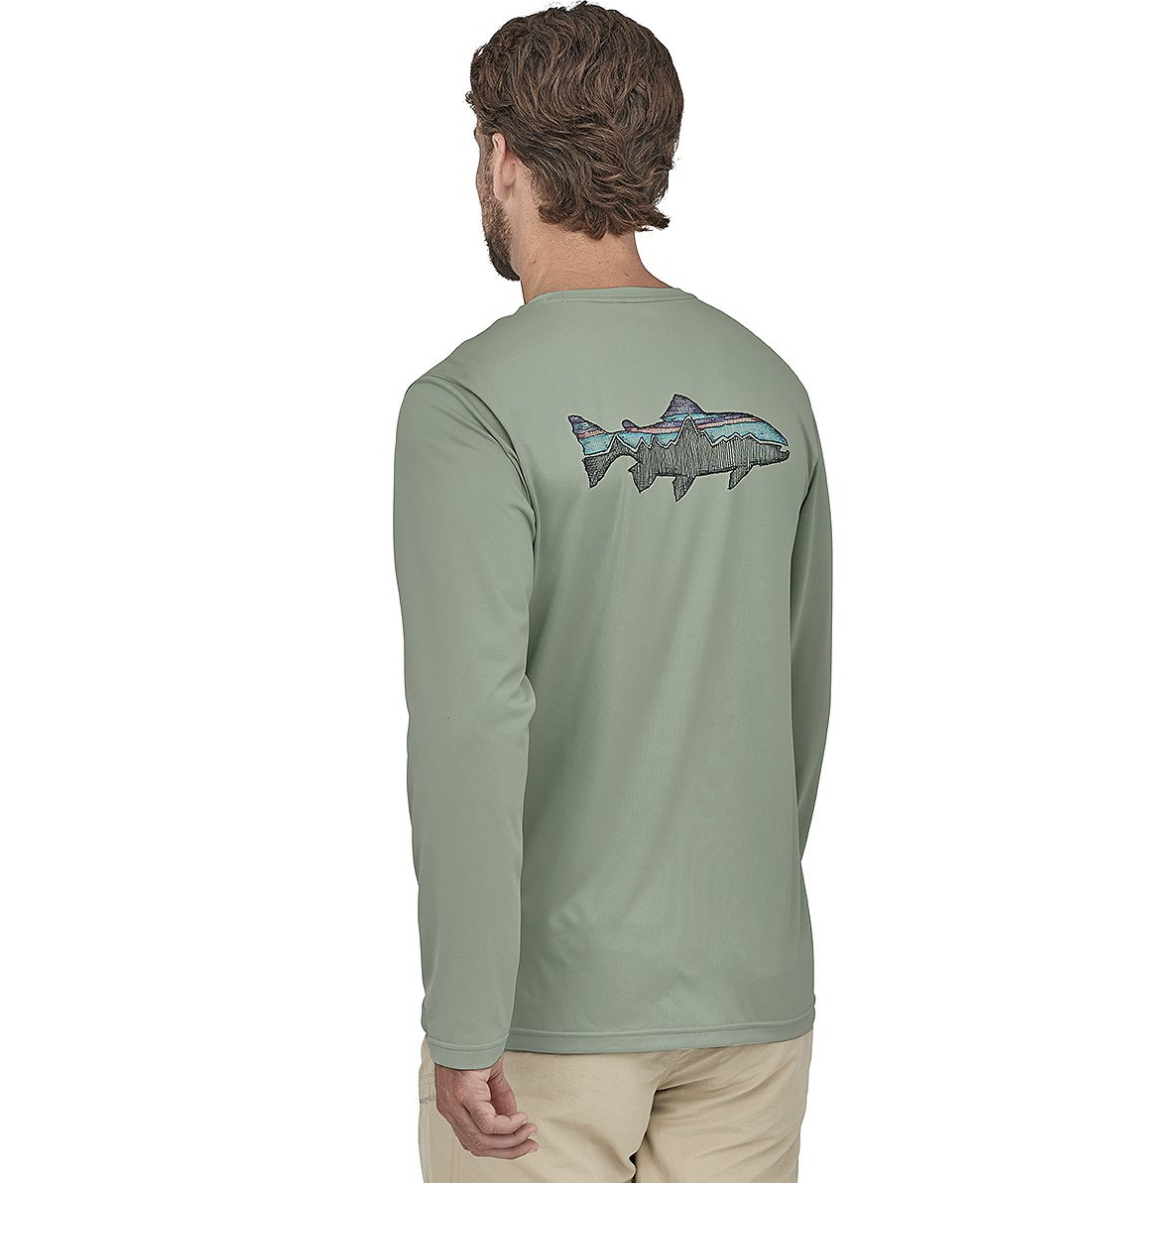 Patagonia M's Graphic Tech Fish Tee - Painted Fitz Roy Trout: Lite Distilled - XL